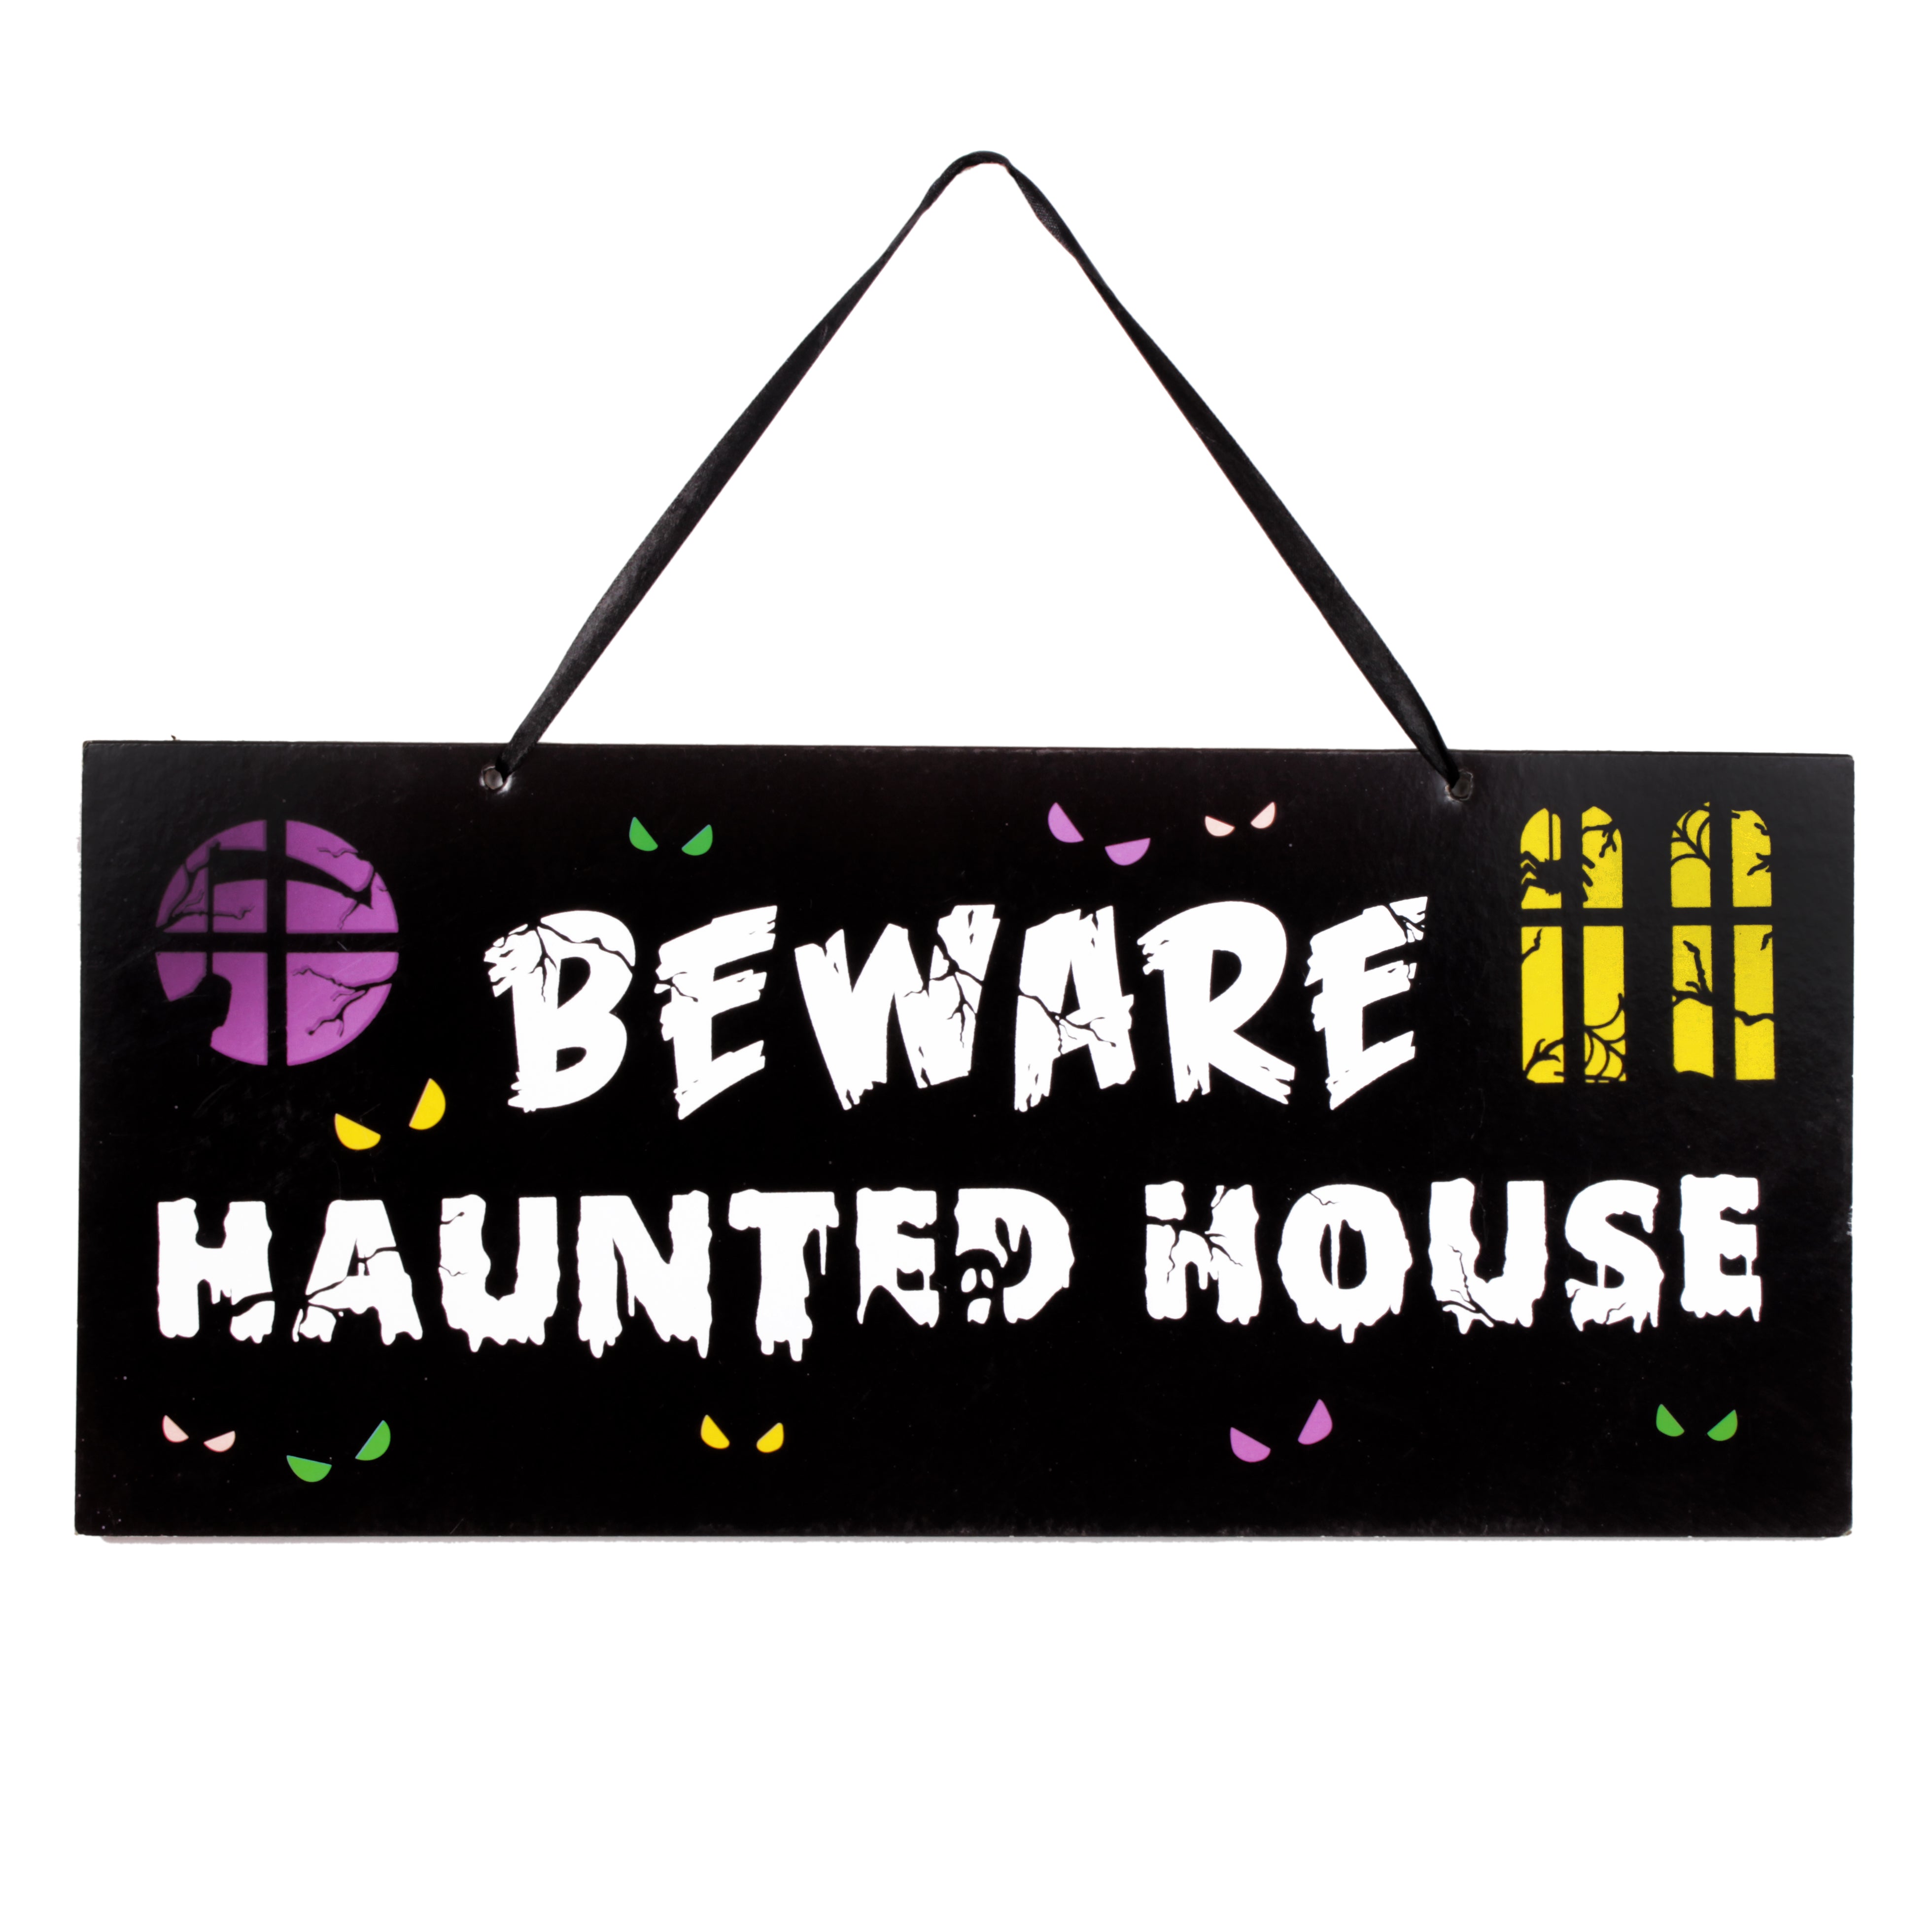 Warning Sign - Beware Haunted House - Hanging Sign Board 45cm x 20cm